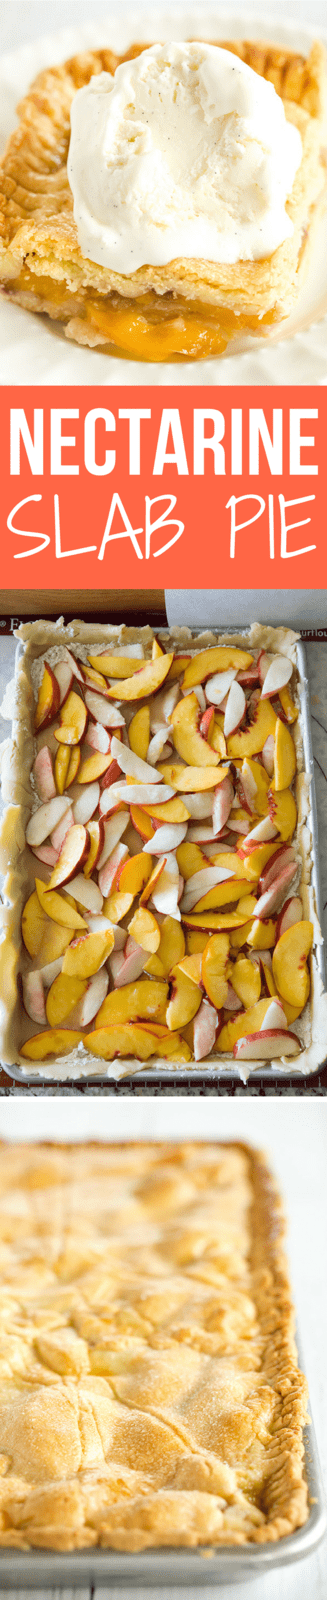 Nectarine Slab Pie - Homemade pie with a tender pastry crust and filled with both yellow and white nectarines. A summer must!